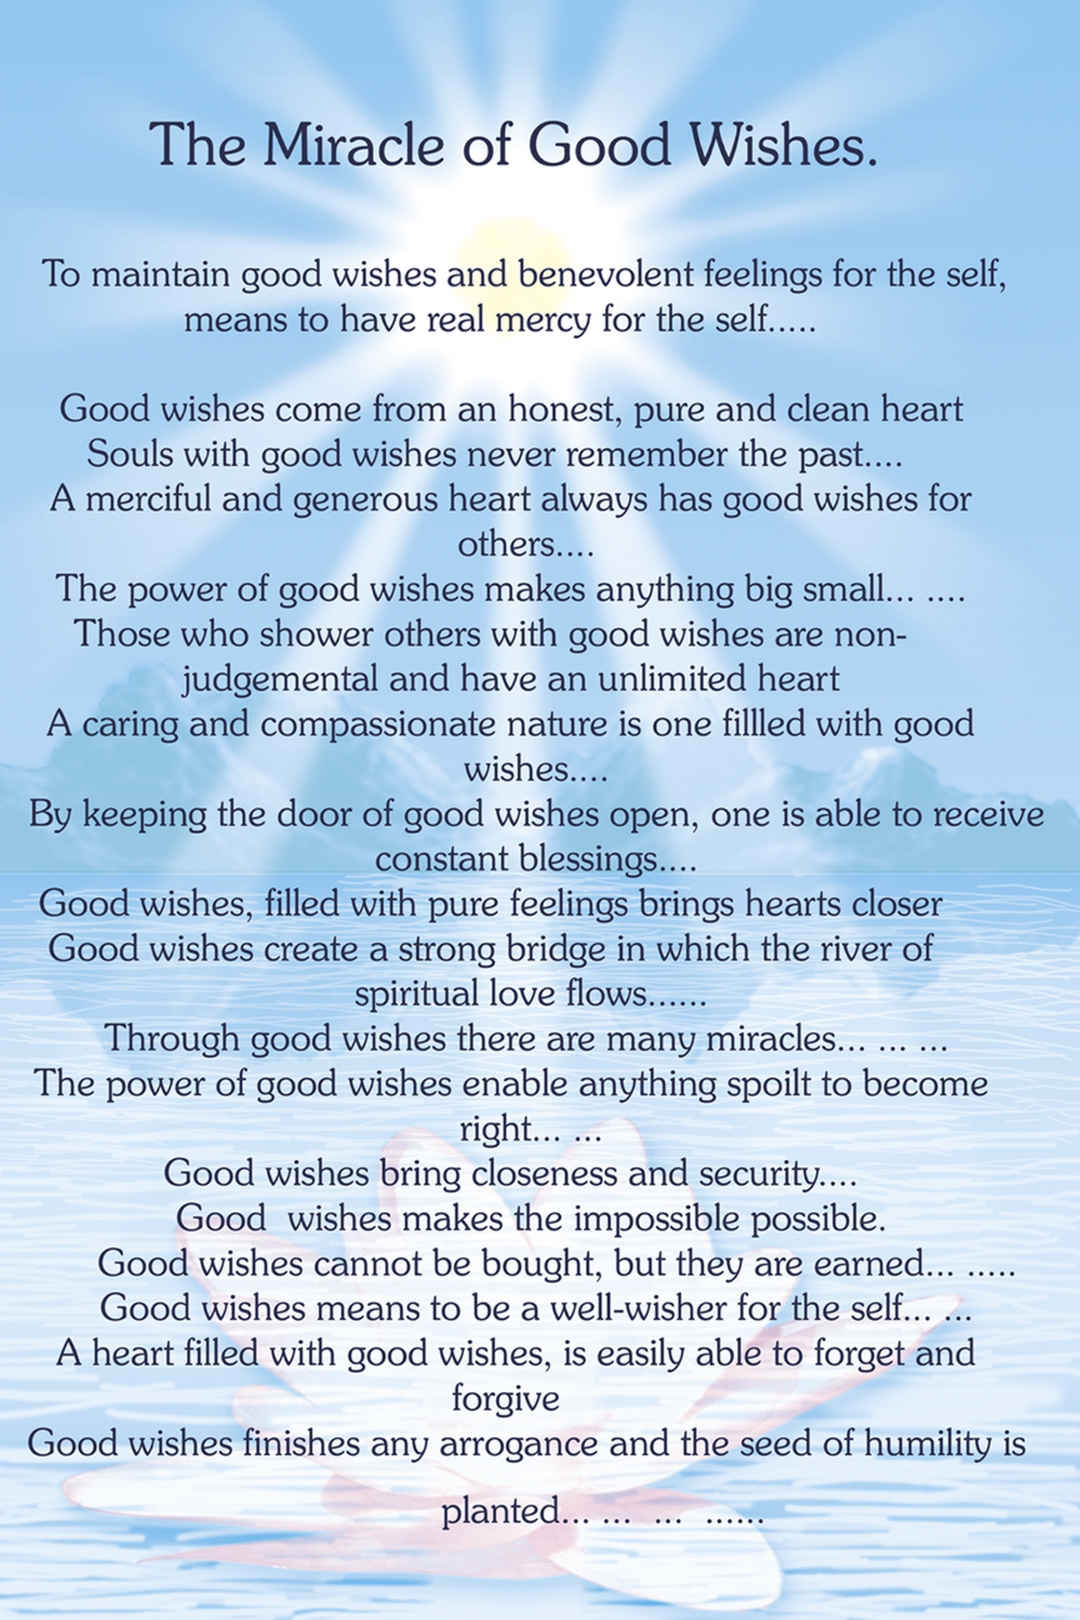 The miracle of good wishes